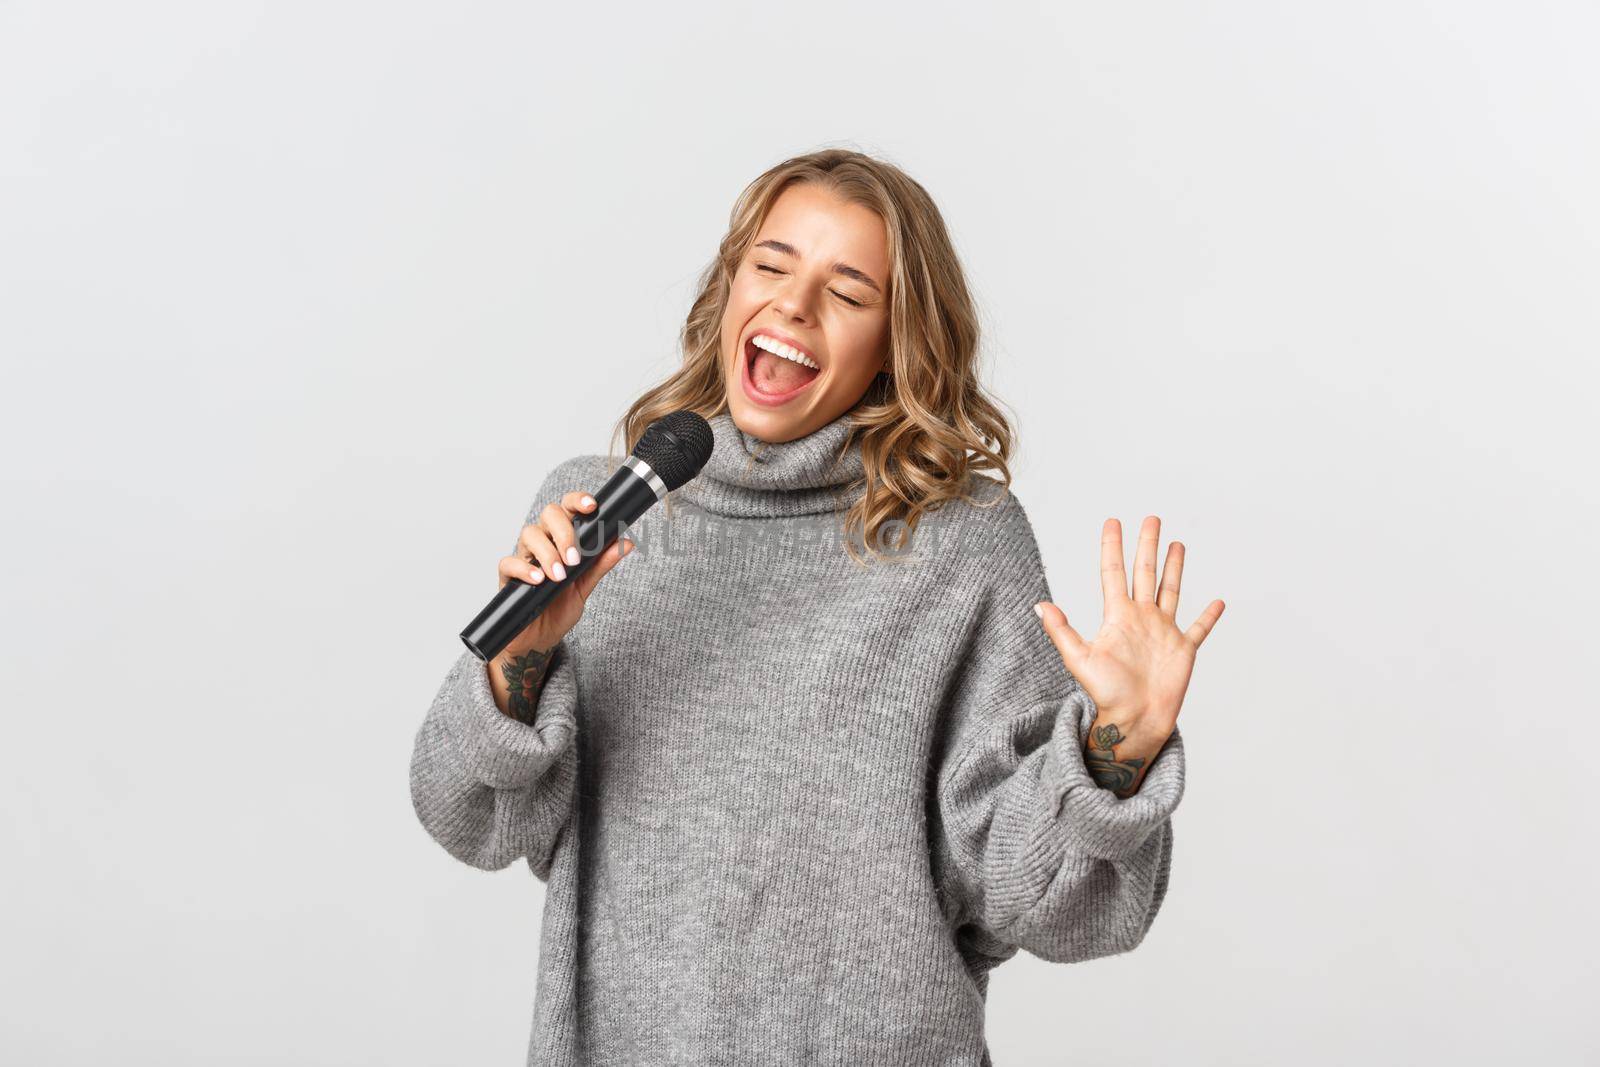 Image of happy blond girl in grey sweater, singing with microphone, standing over white background.